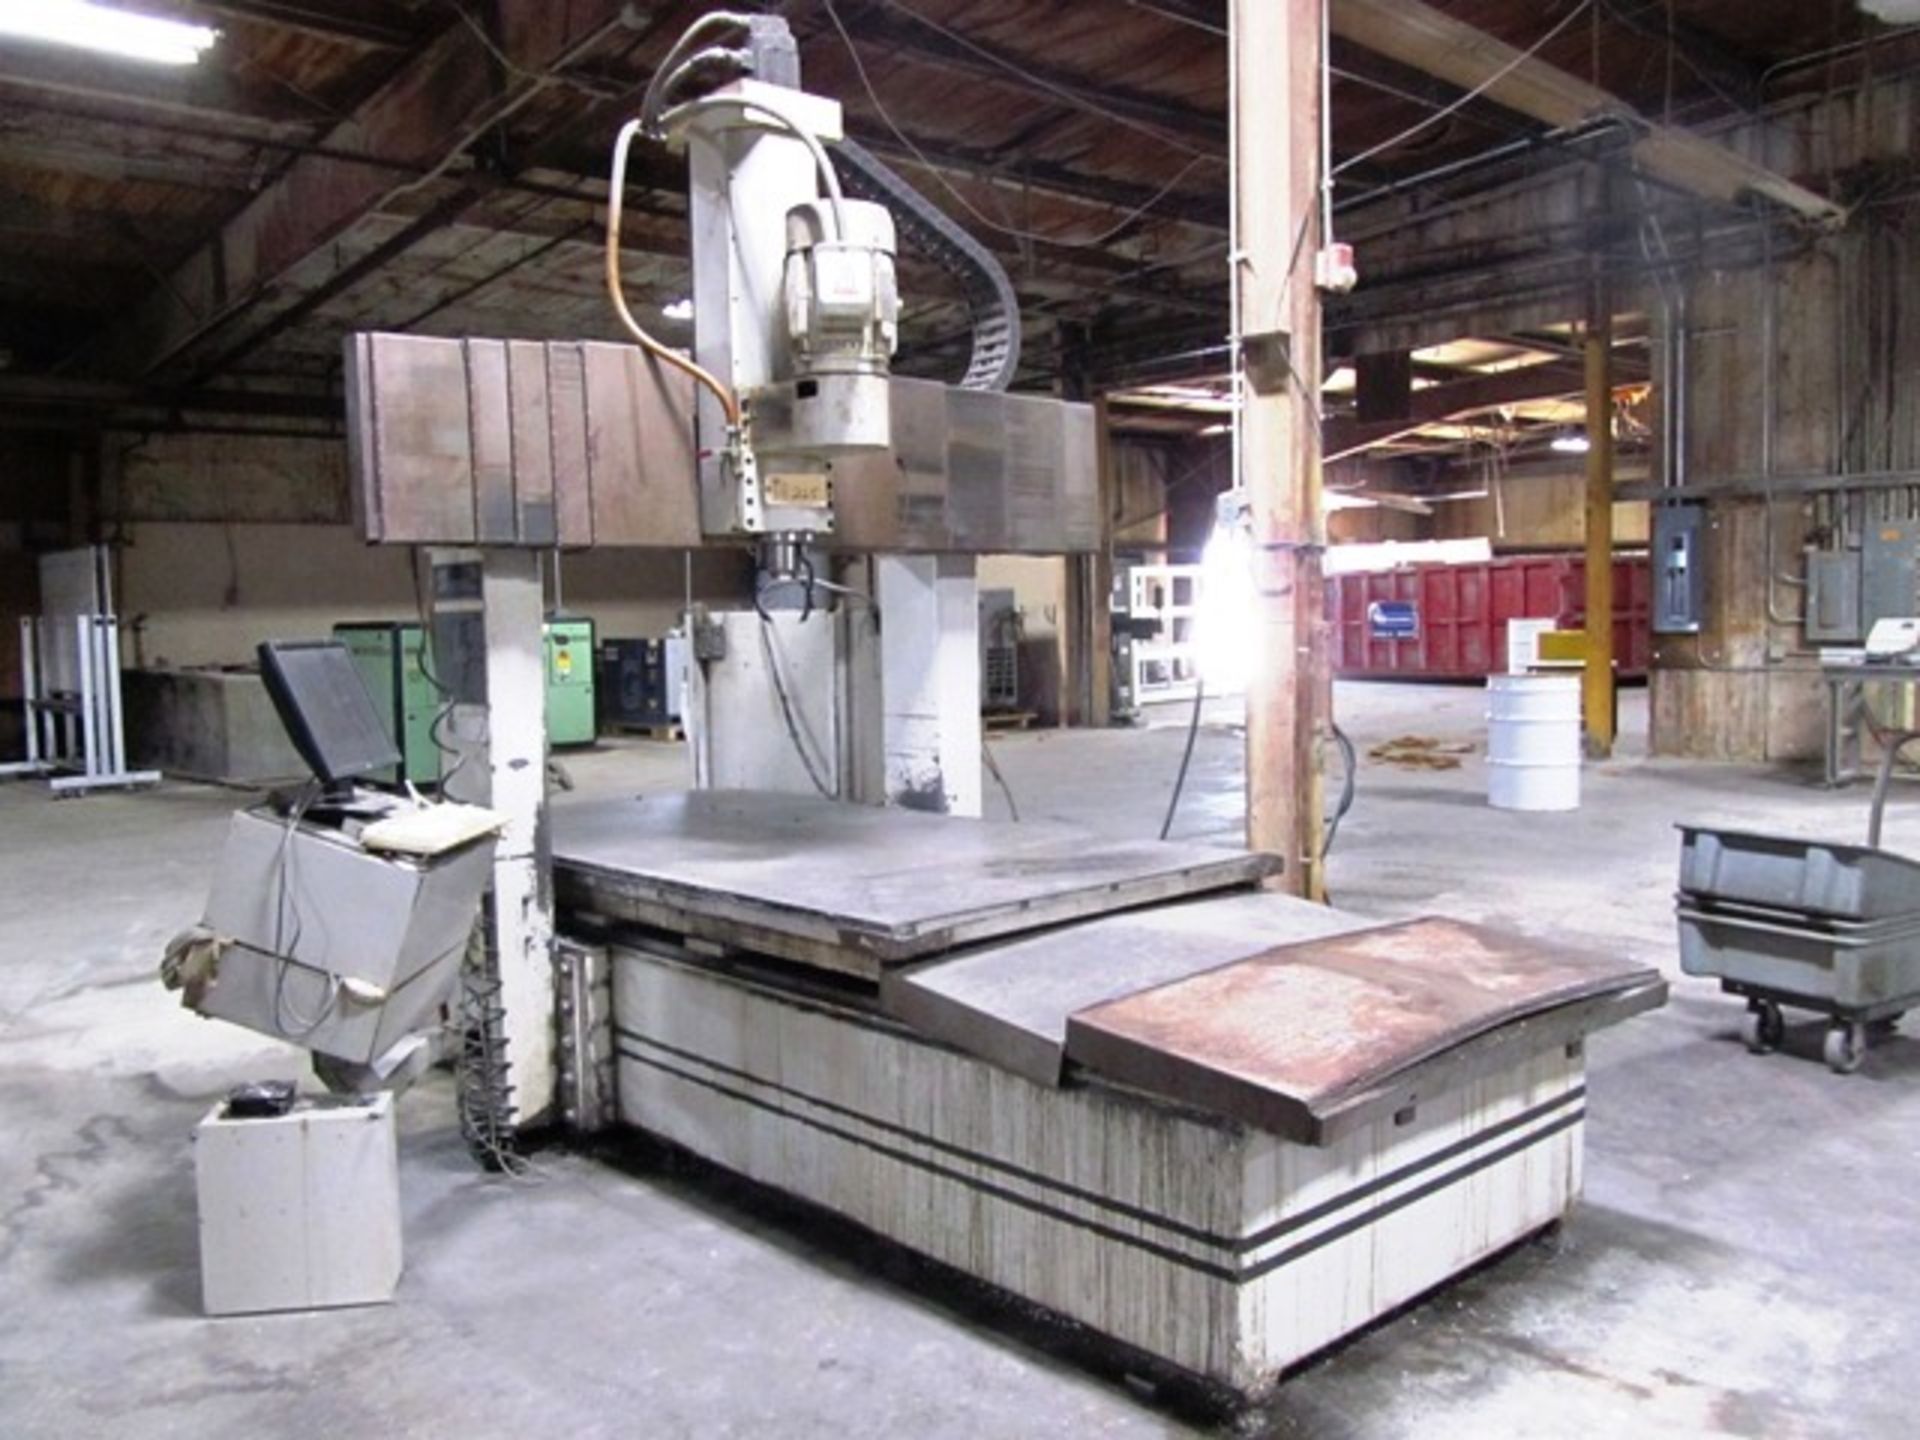 Milltronics BR50 CNC Vertical Bridge Mill with 48'' x 98'' Table, #40 Taper Spindle, 50'' X-Axis